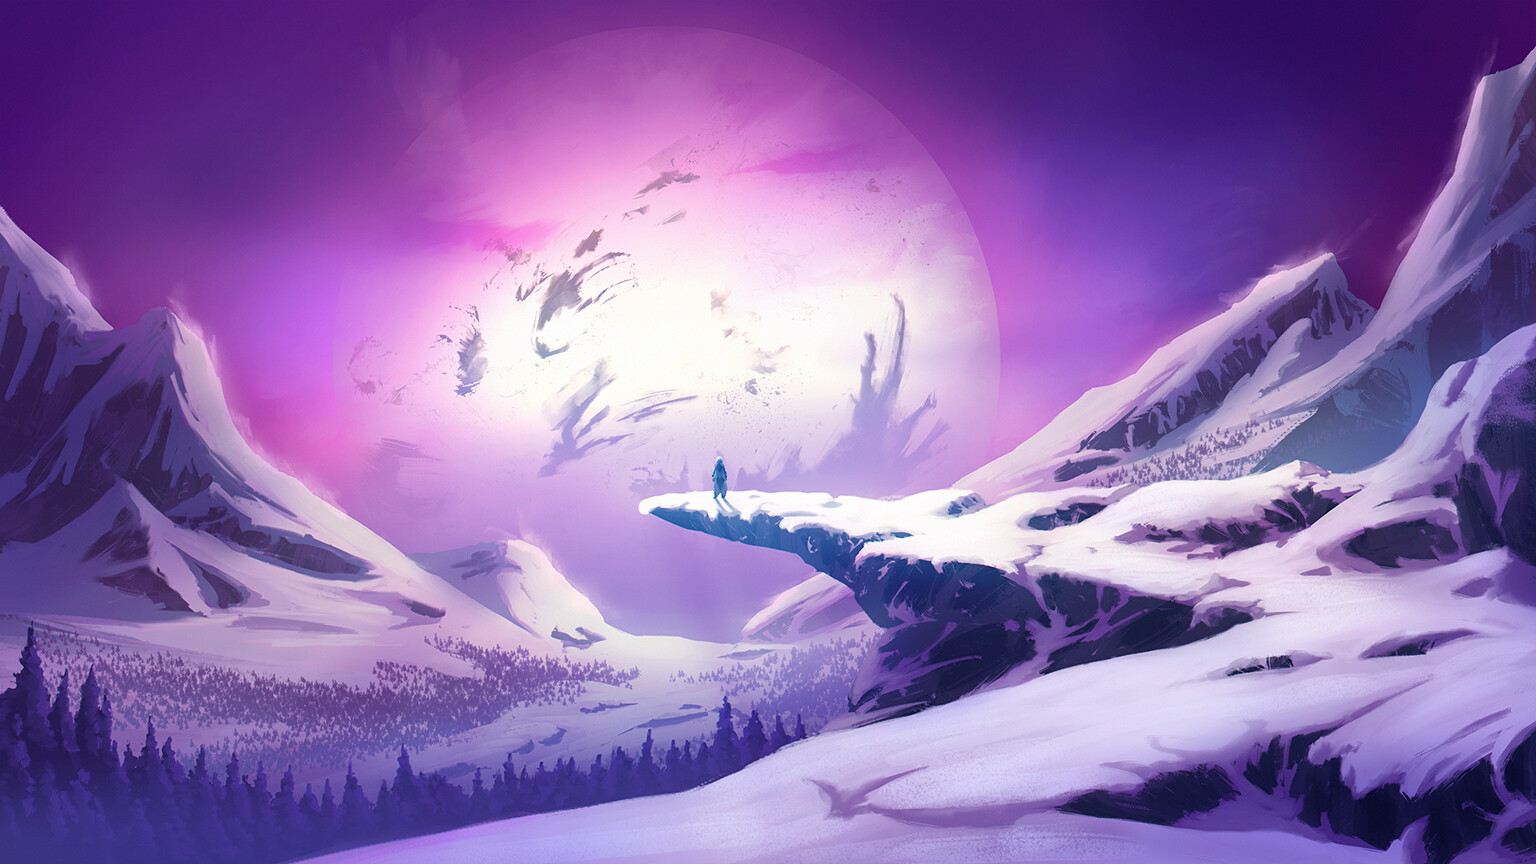 [Commission] Wallpapers of snowy mountains with The Traveler